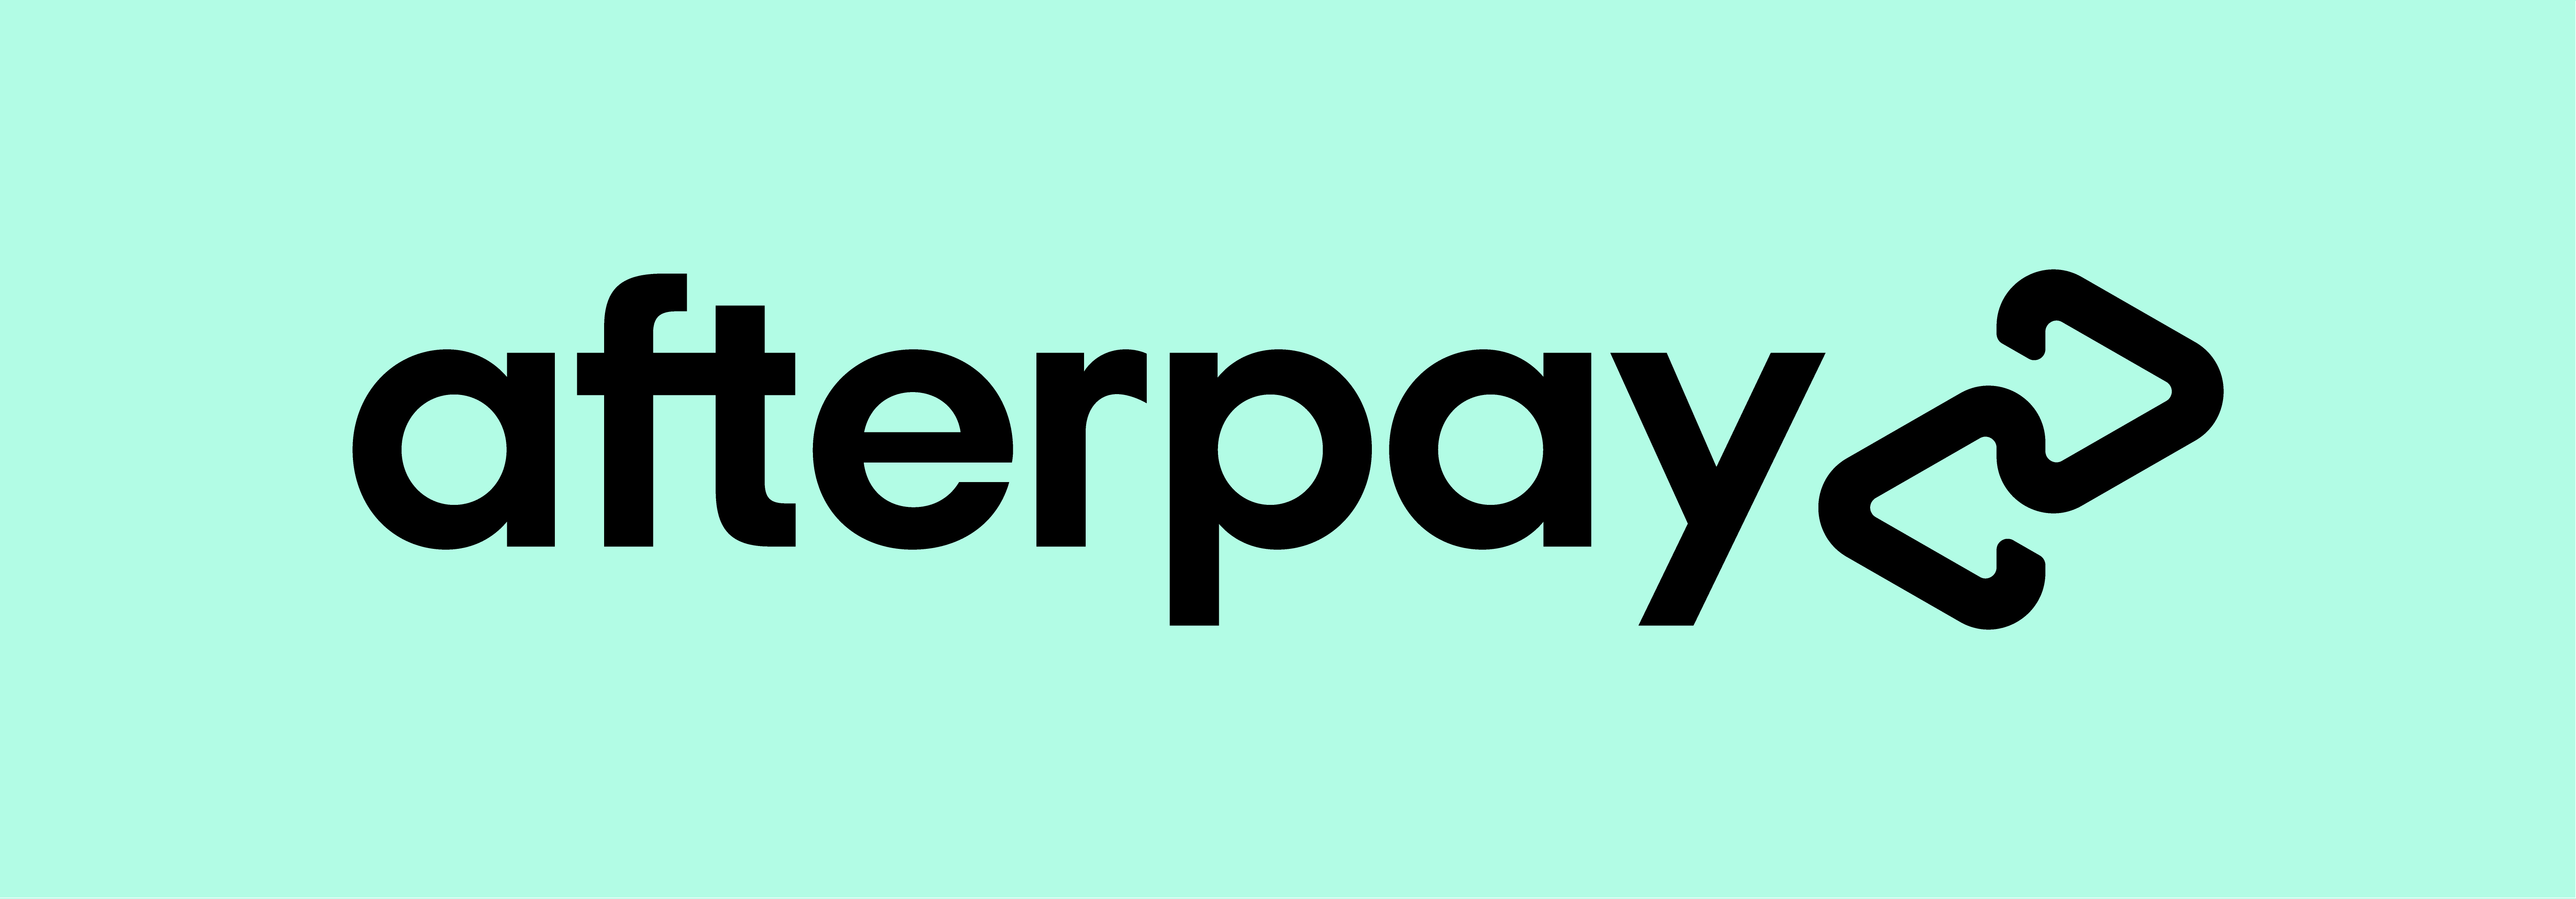 The Container Store and Afterpay Partner to Deliver Flexible Payments